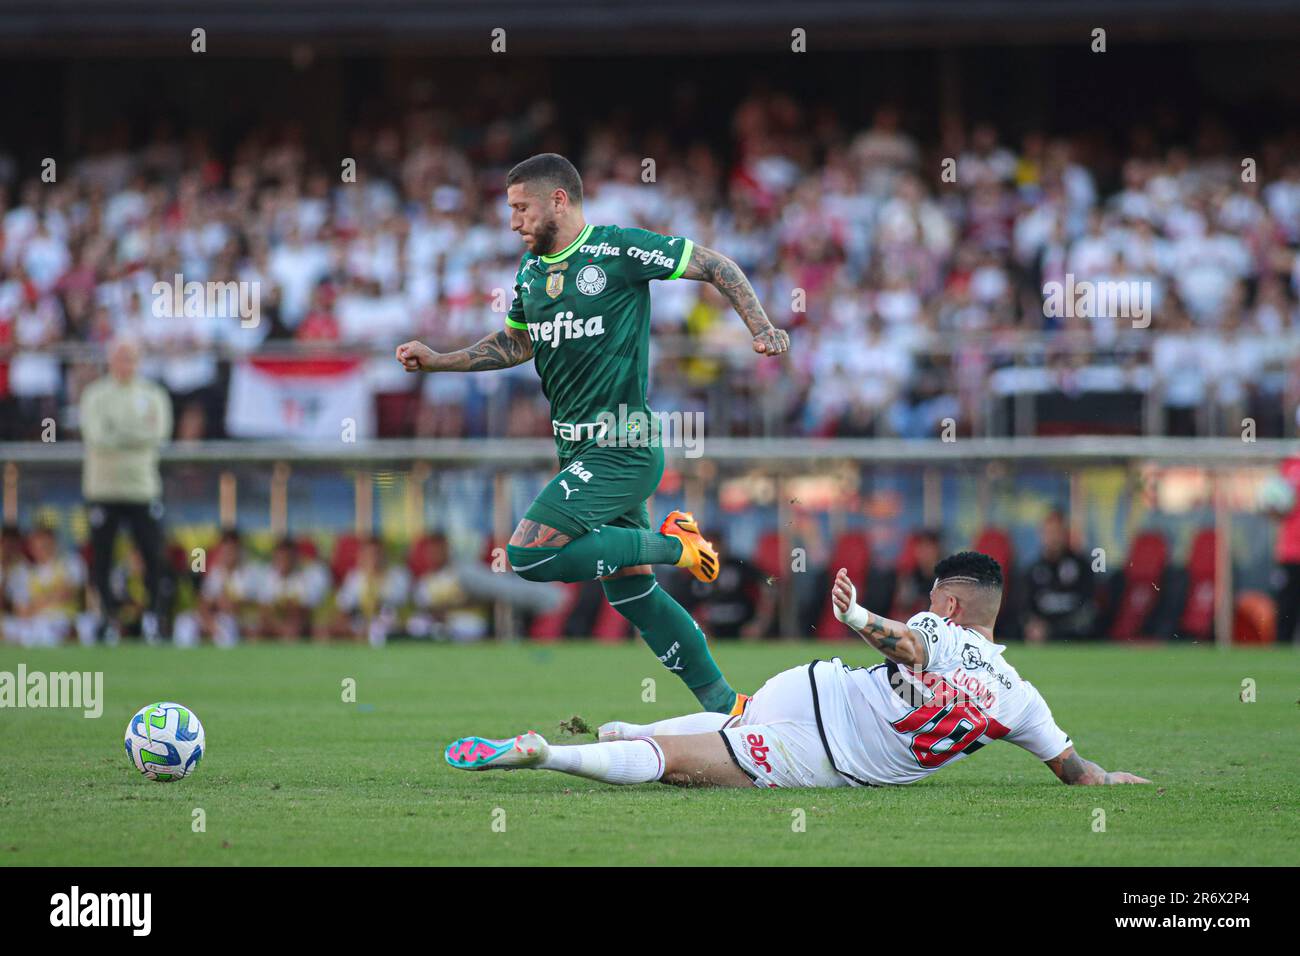 Sao Paulo, Brazil. 13th June, 2021. Luciano do Sao Paulo competes with Ze Rafael do Palmeiras, during the match between Sao Paulo and Palmeiras, for the 10th round of the 2023 Brazilian Series A Championship at Morumbi Stadium, this Sunday, 11. 30761 (Wanderson Oliveira/SPP) Credit: SPP Sport Press Photo. /Alamy Live News Stock Photo